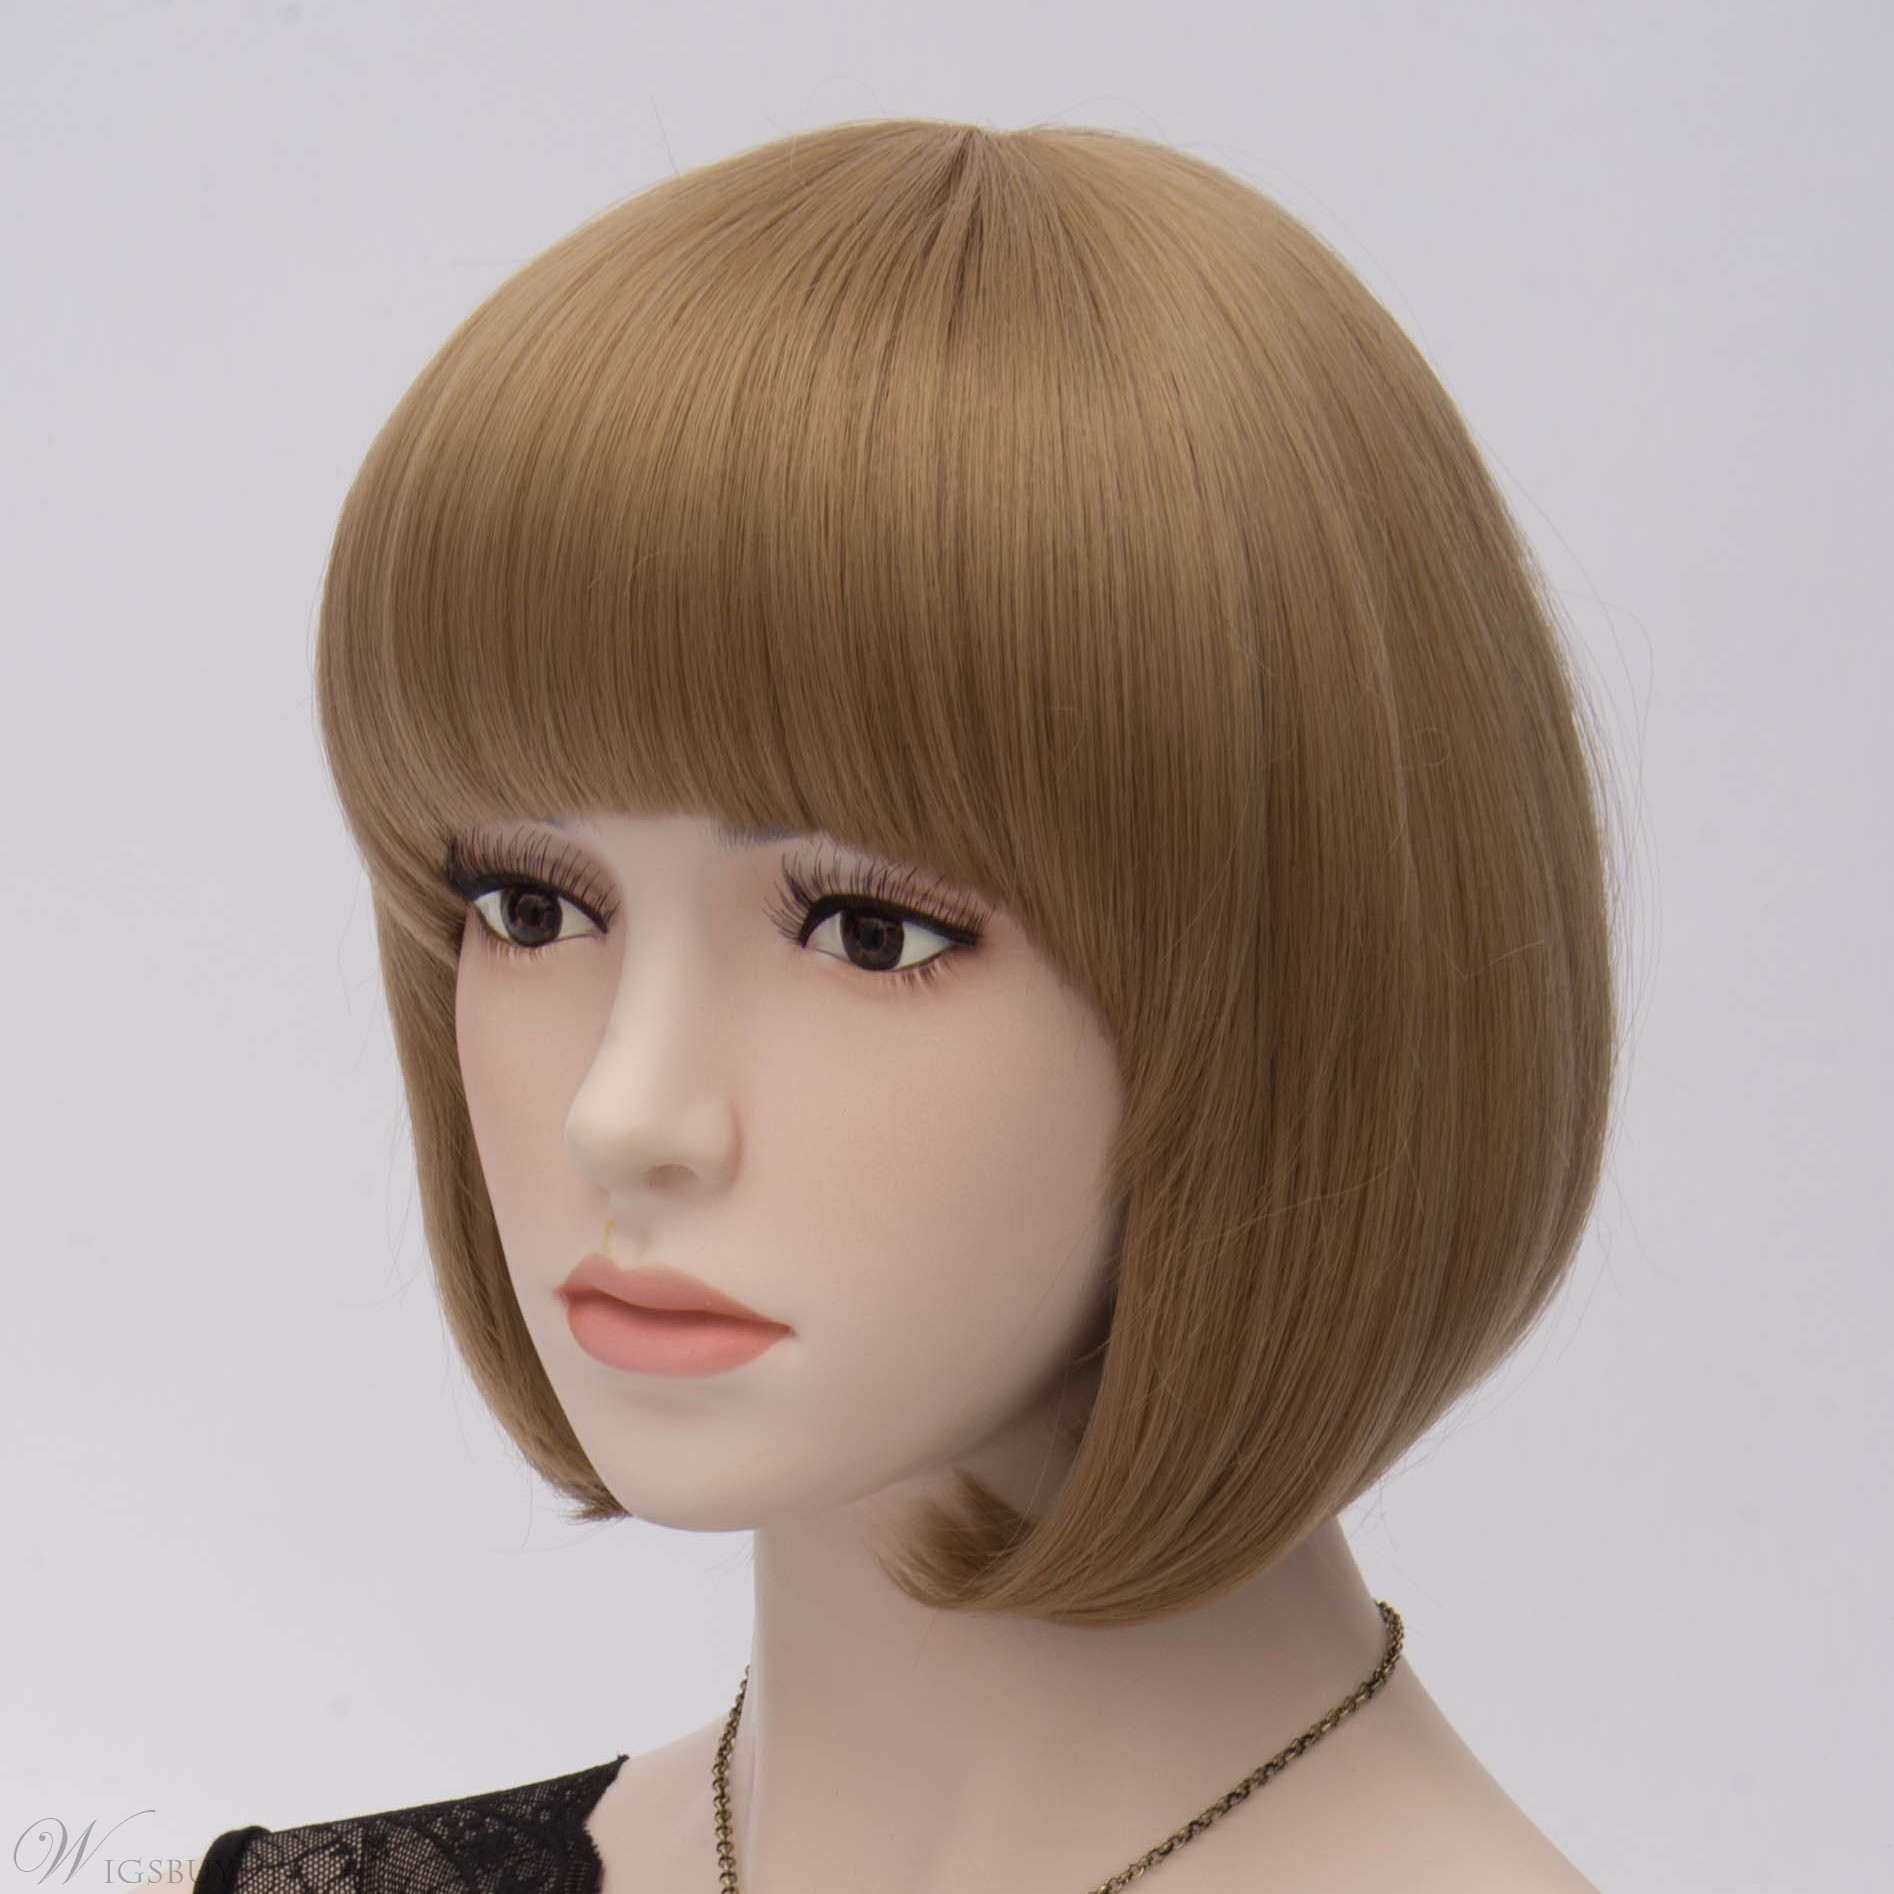 Anime Bob Hairstyle
 Cute Brown Bob Hairstyle Anime Festival Cosplay Party Wig